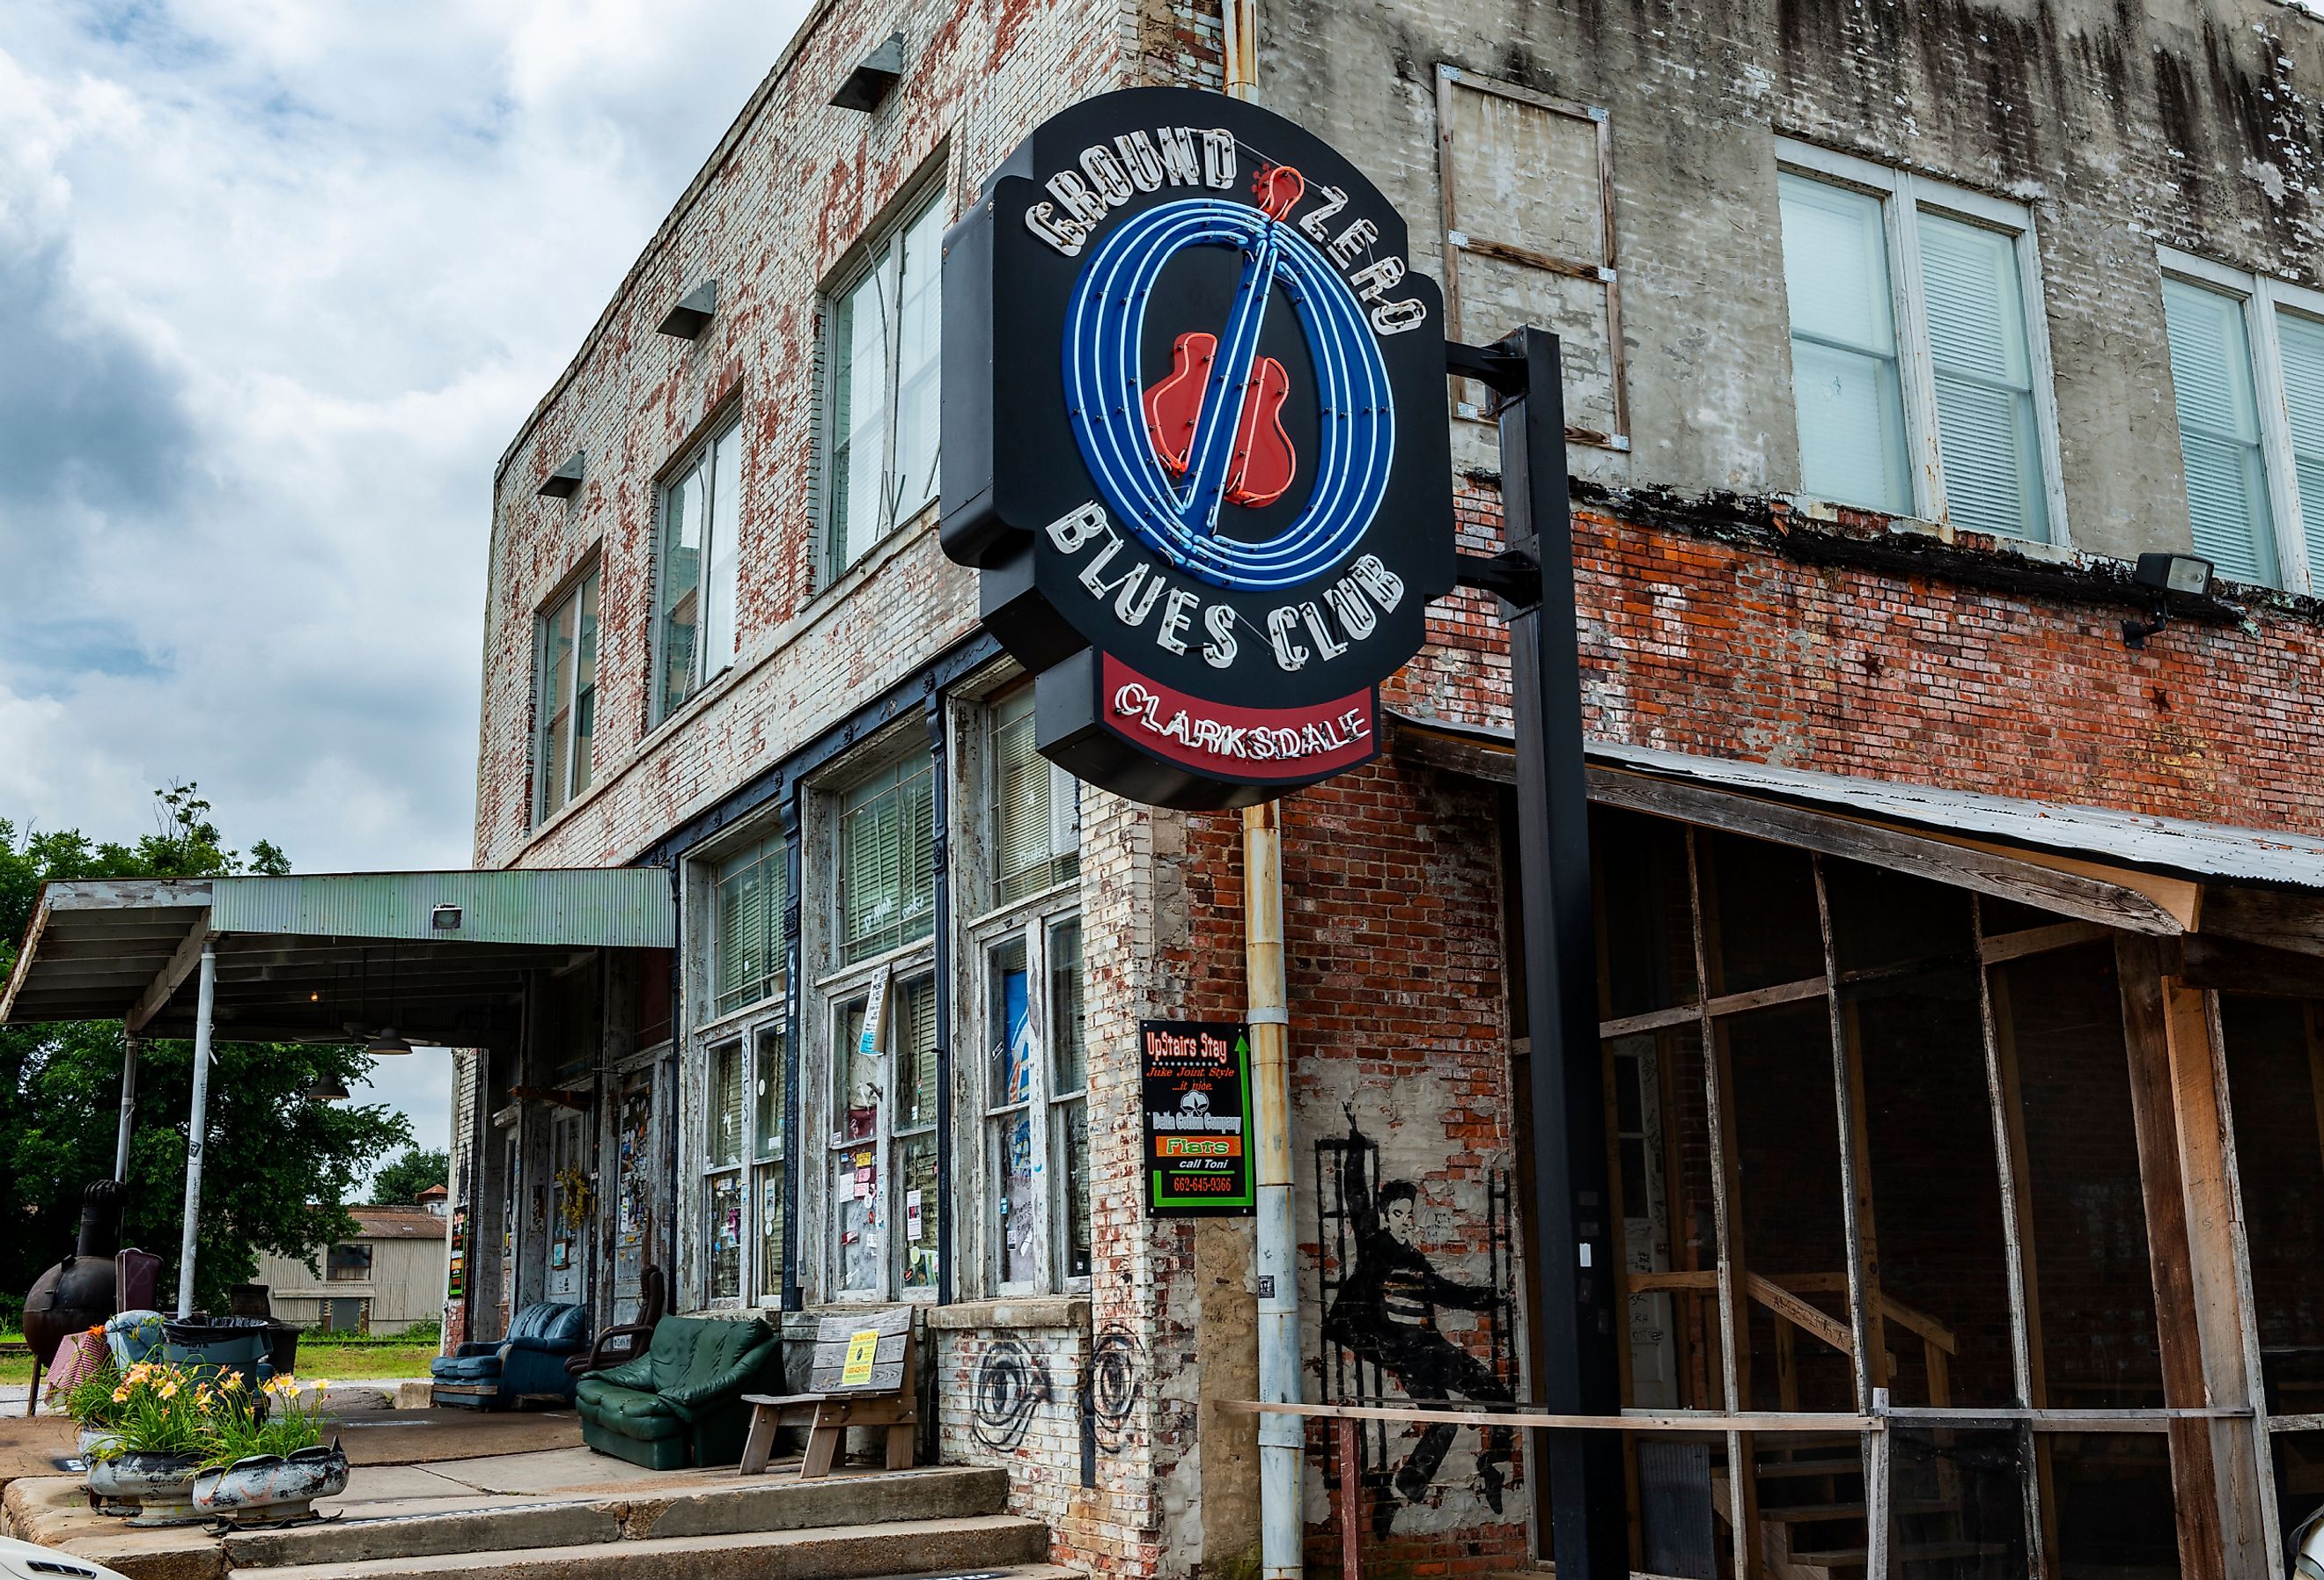 The facade of the famous Ground Zero Blues Club in Clarksdale, Mississippi. Image credit TLF Images via Shutterstock